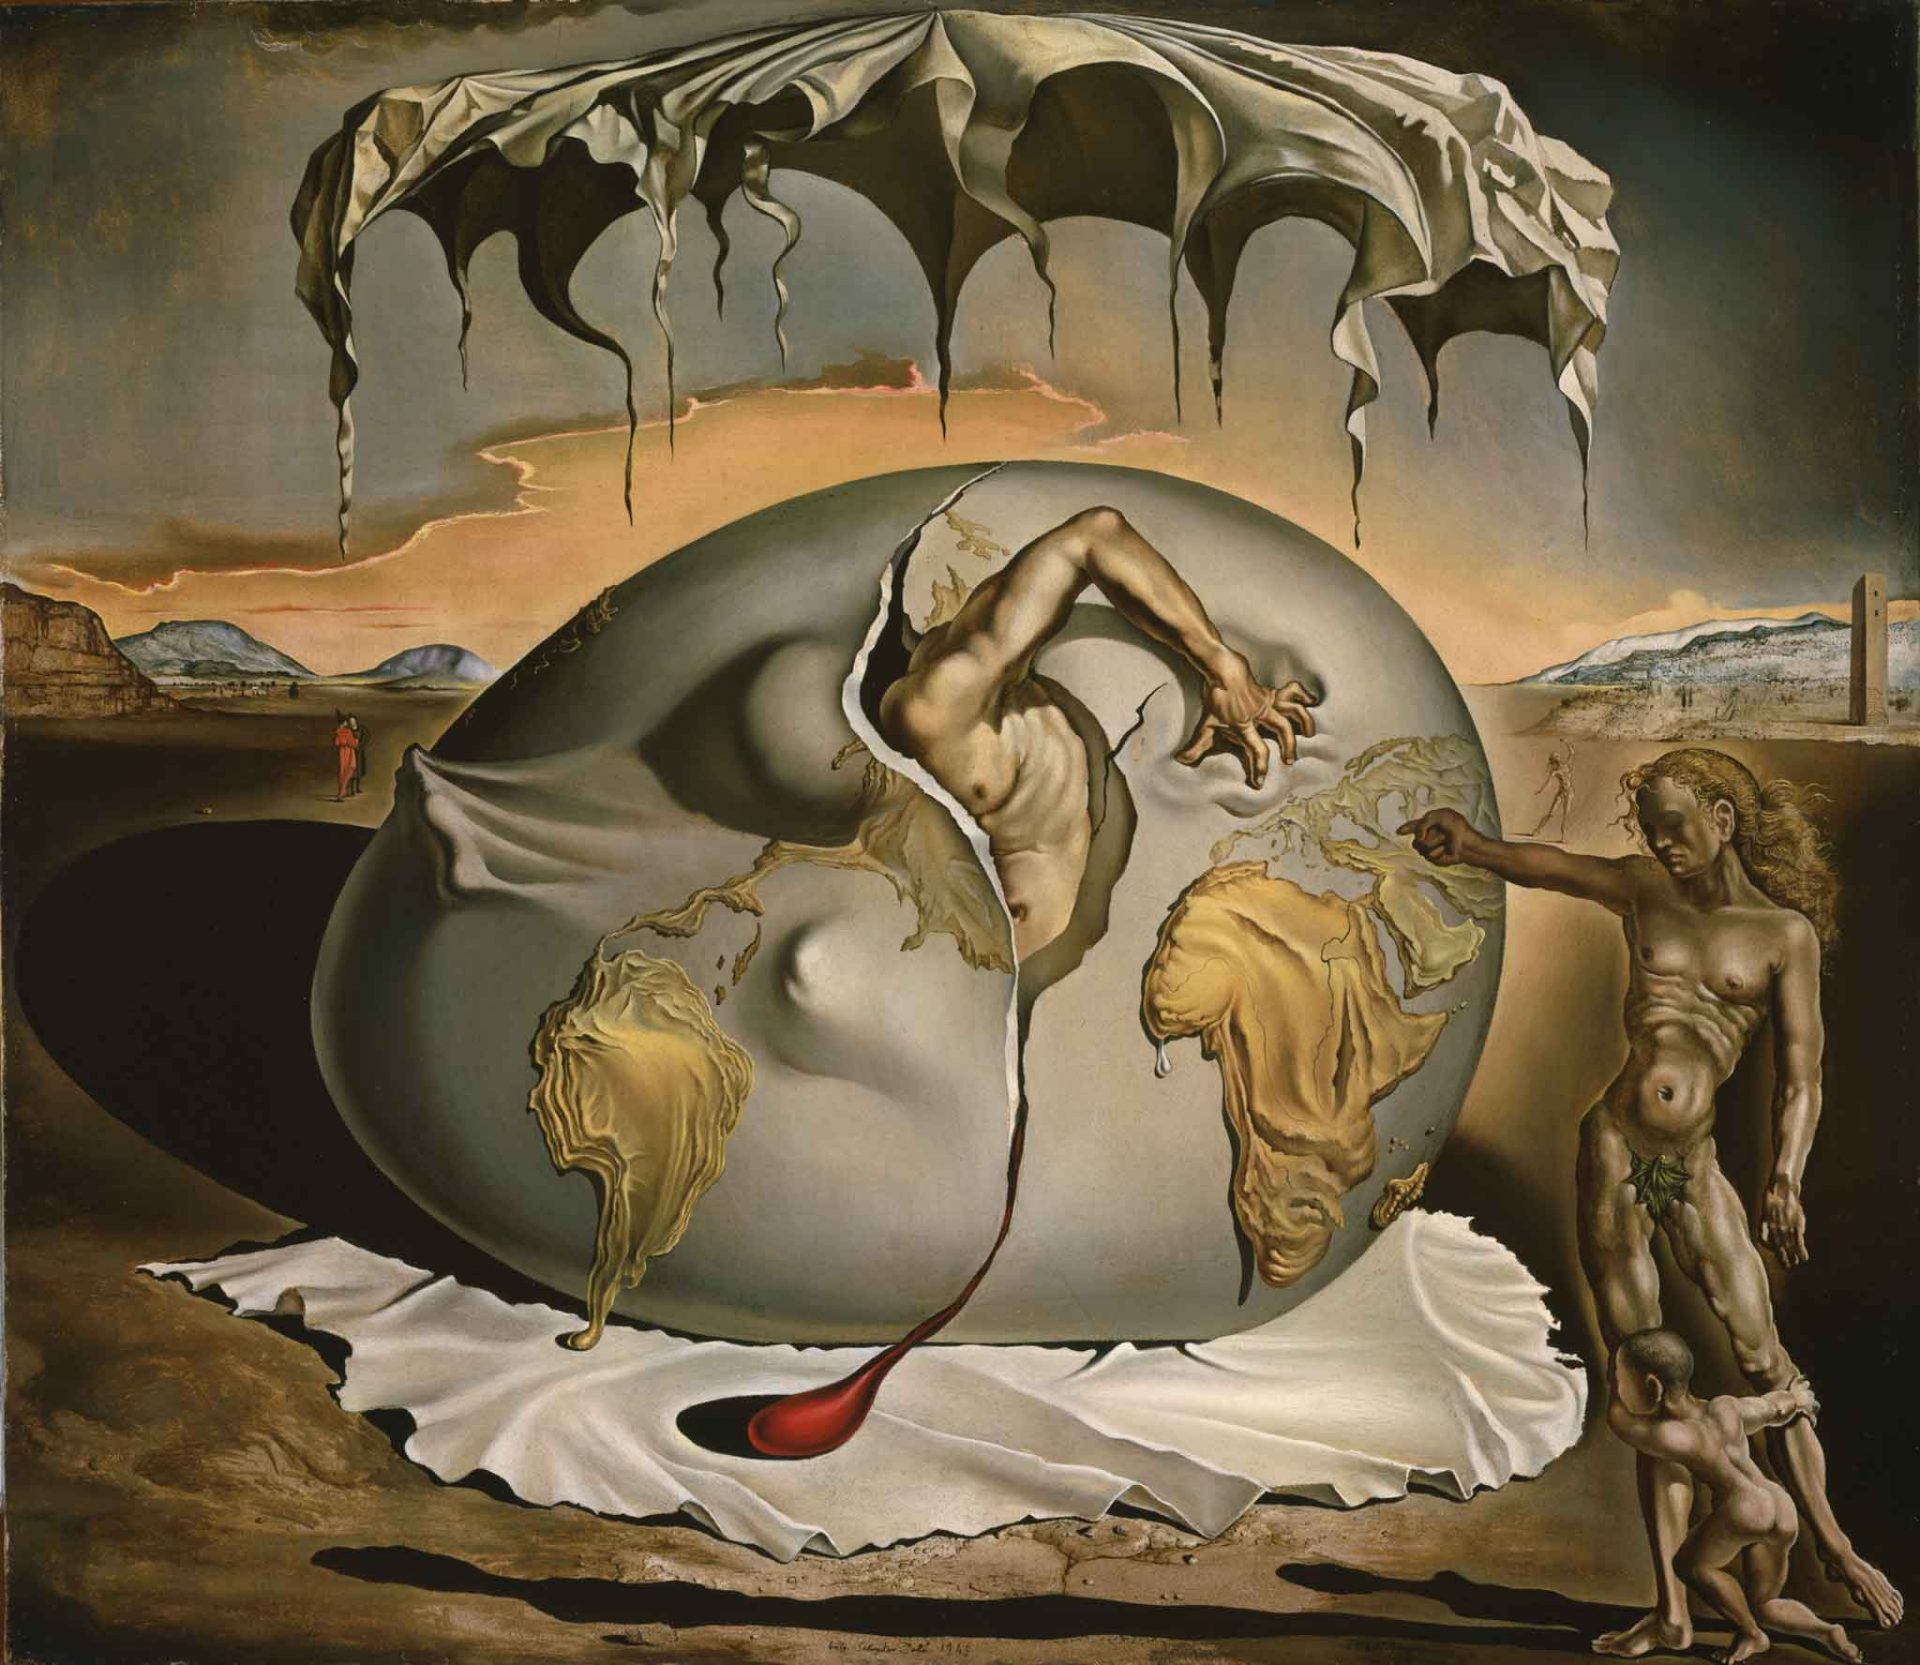 A surrealist painting by Salvador Dali titled “Geopoliticus Child Watching the Birth of the New Man” depicting a large egg-like structure with a crack in it, from which a man is emerging upside down and covered by a cloth. A child is standing on the right side of the painting, observing the scene. The background is a desolate landscape with a cloudy sky and a few buildings in the distance. The painting is said to be one of Dali’s most recognizable paintings and reflects his views on the changing world order during World War II.